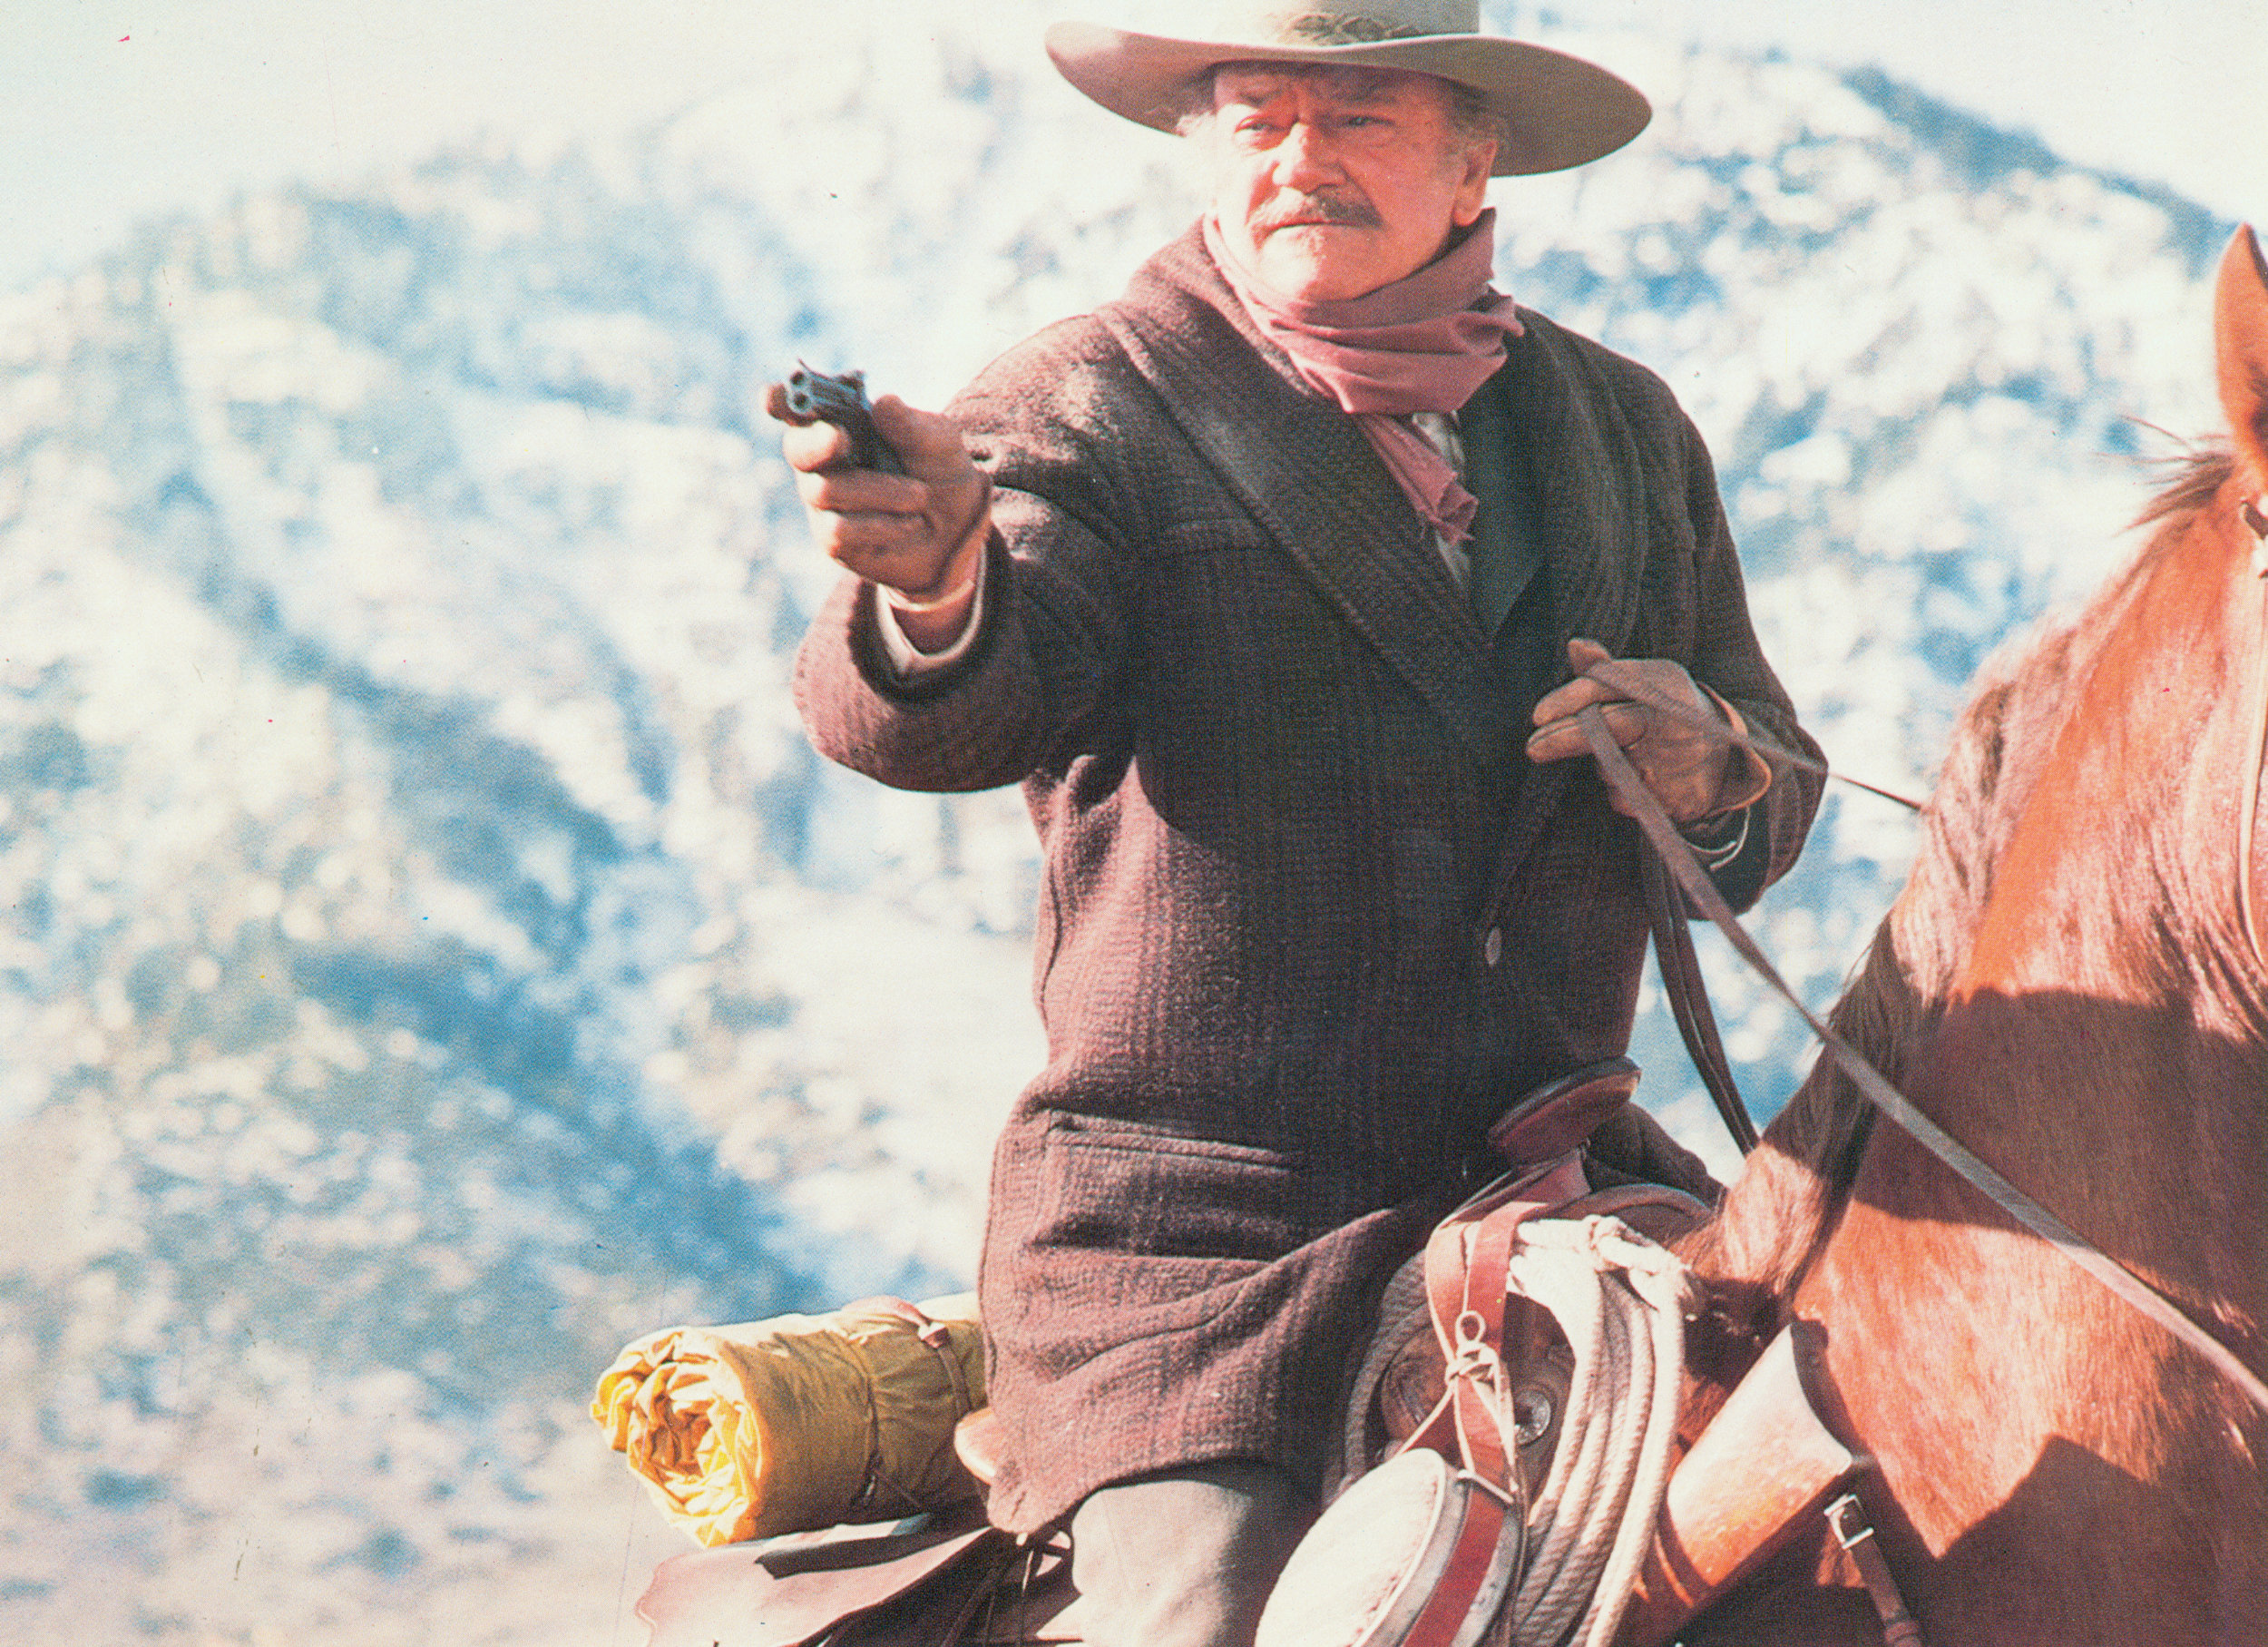 In iconic fashion, John Wayne portrays an ailing gunfighter in the Shootist (1976), and what would also be his final of 200 films throughout a 50-year career. Two years following, John Wayne would undergo heart surgery and again battle cancer.